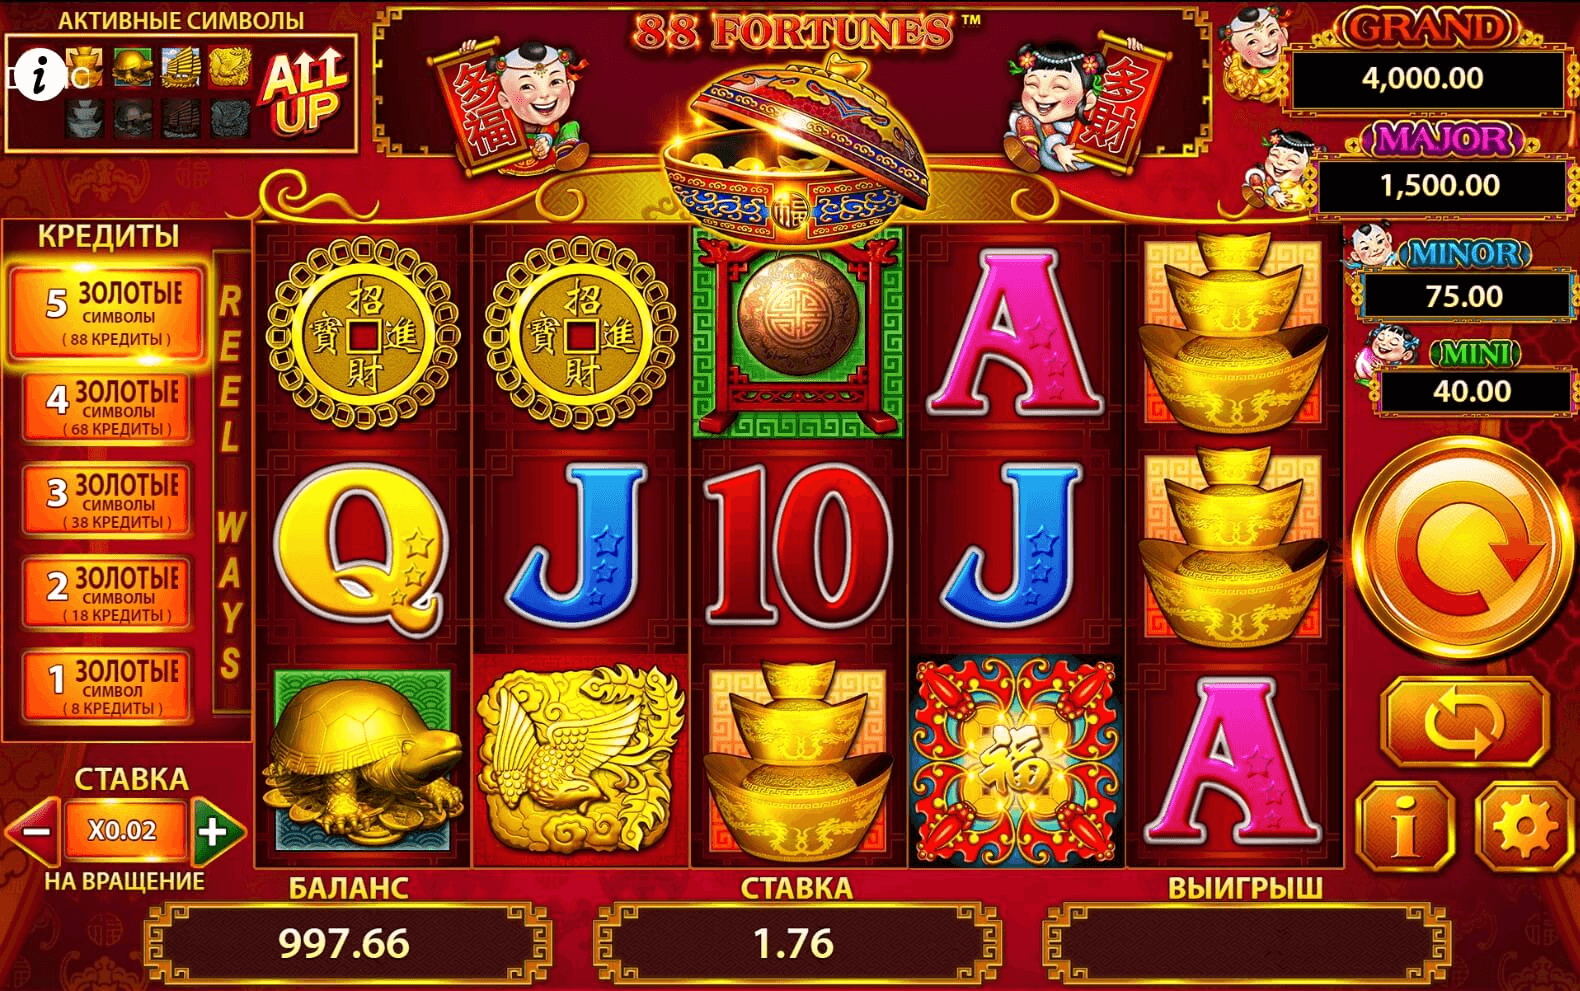 88 Fortunes Slot Machine ᗎ Play FREE Casino Game Online by SG Gaming